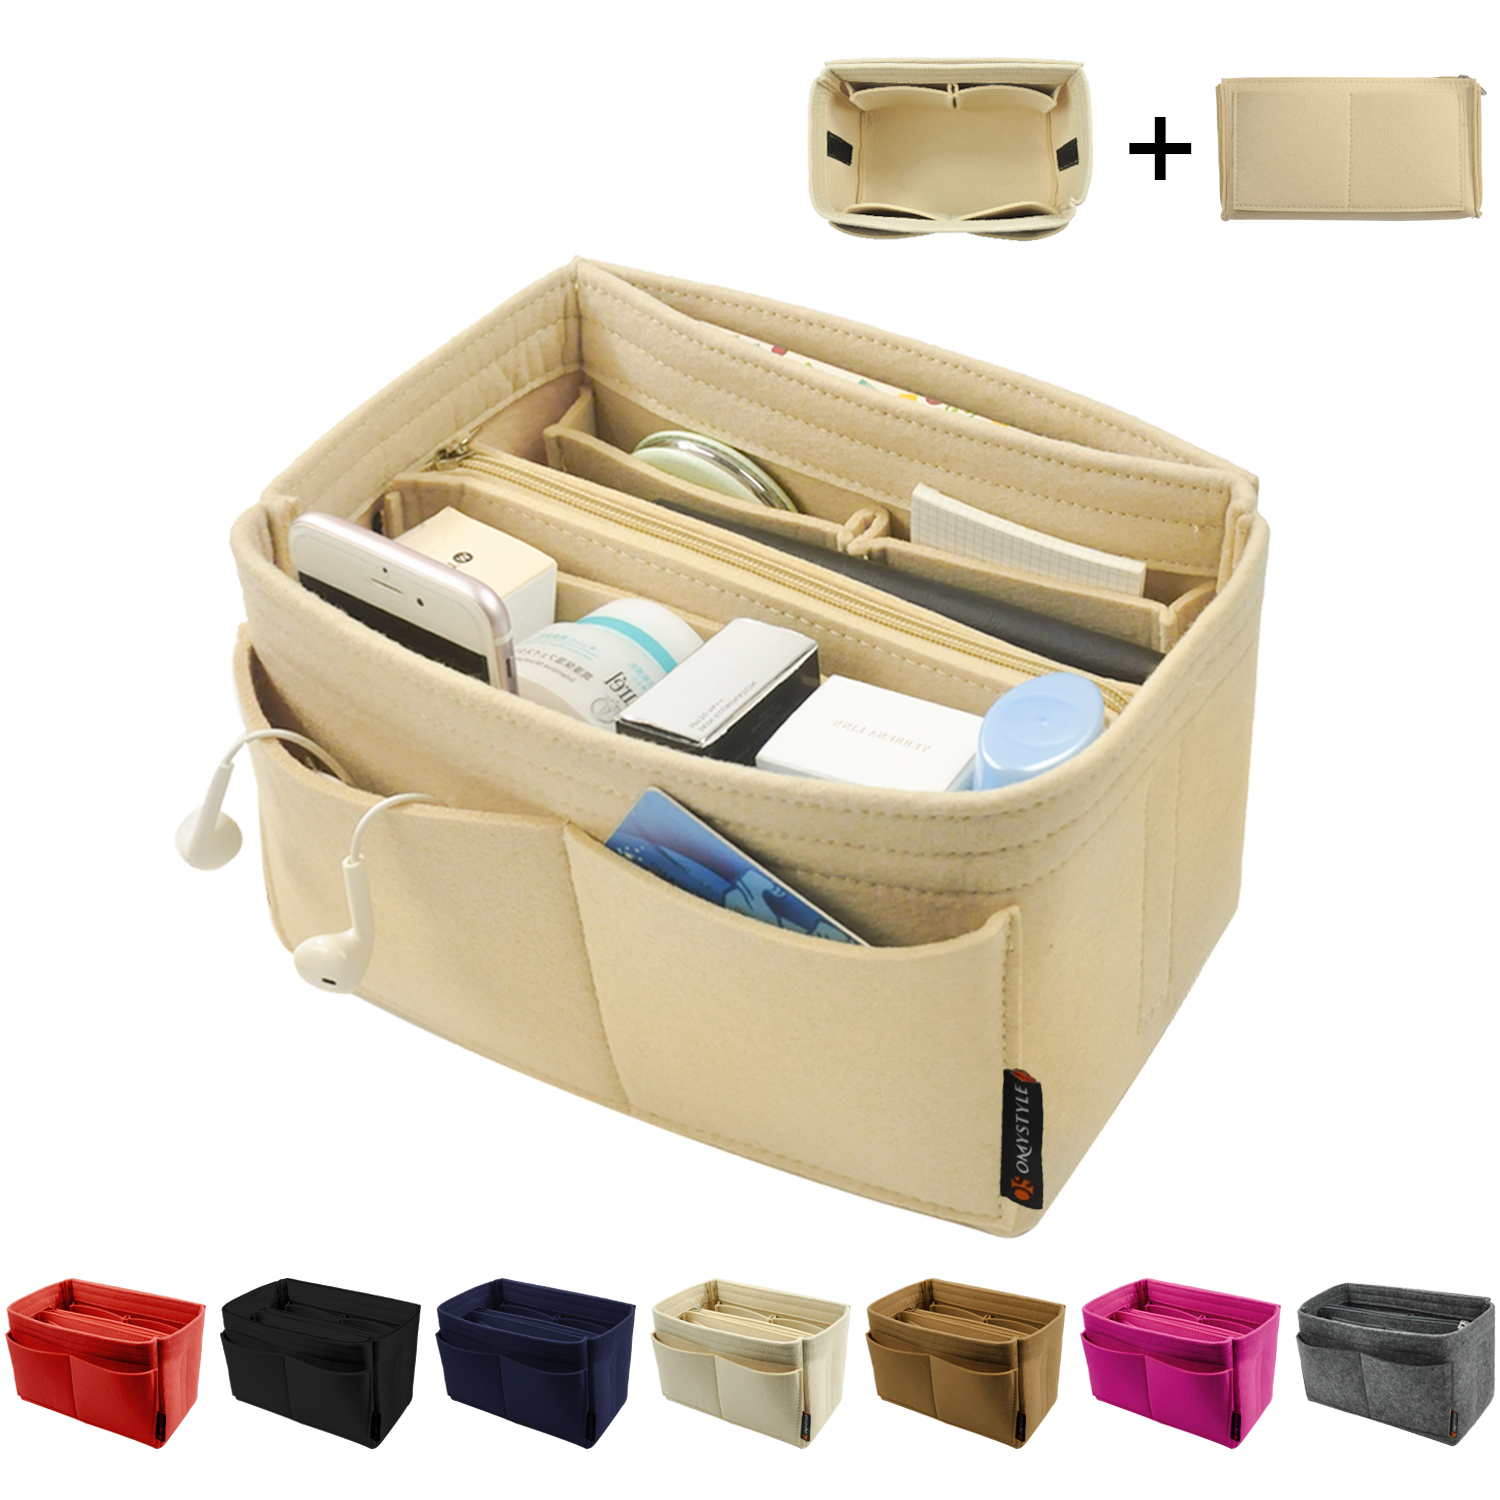 OMYSTYLE Purse Organizer Insert, Handbag & Tote Organizer, Bag in Bag,  Perfect for Speedy Neverfull and More2